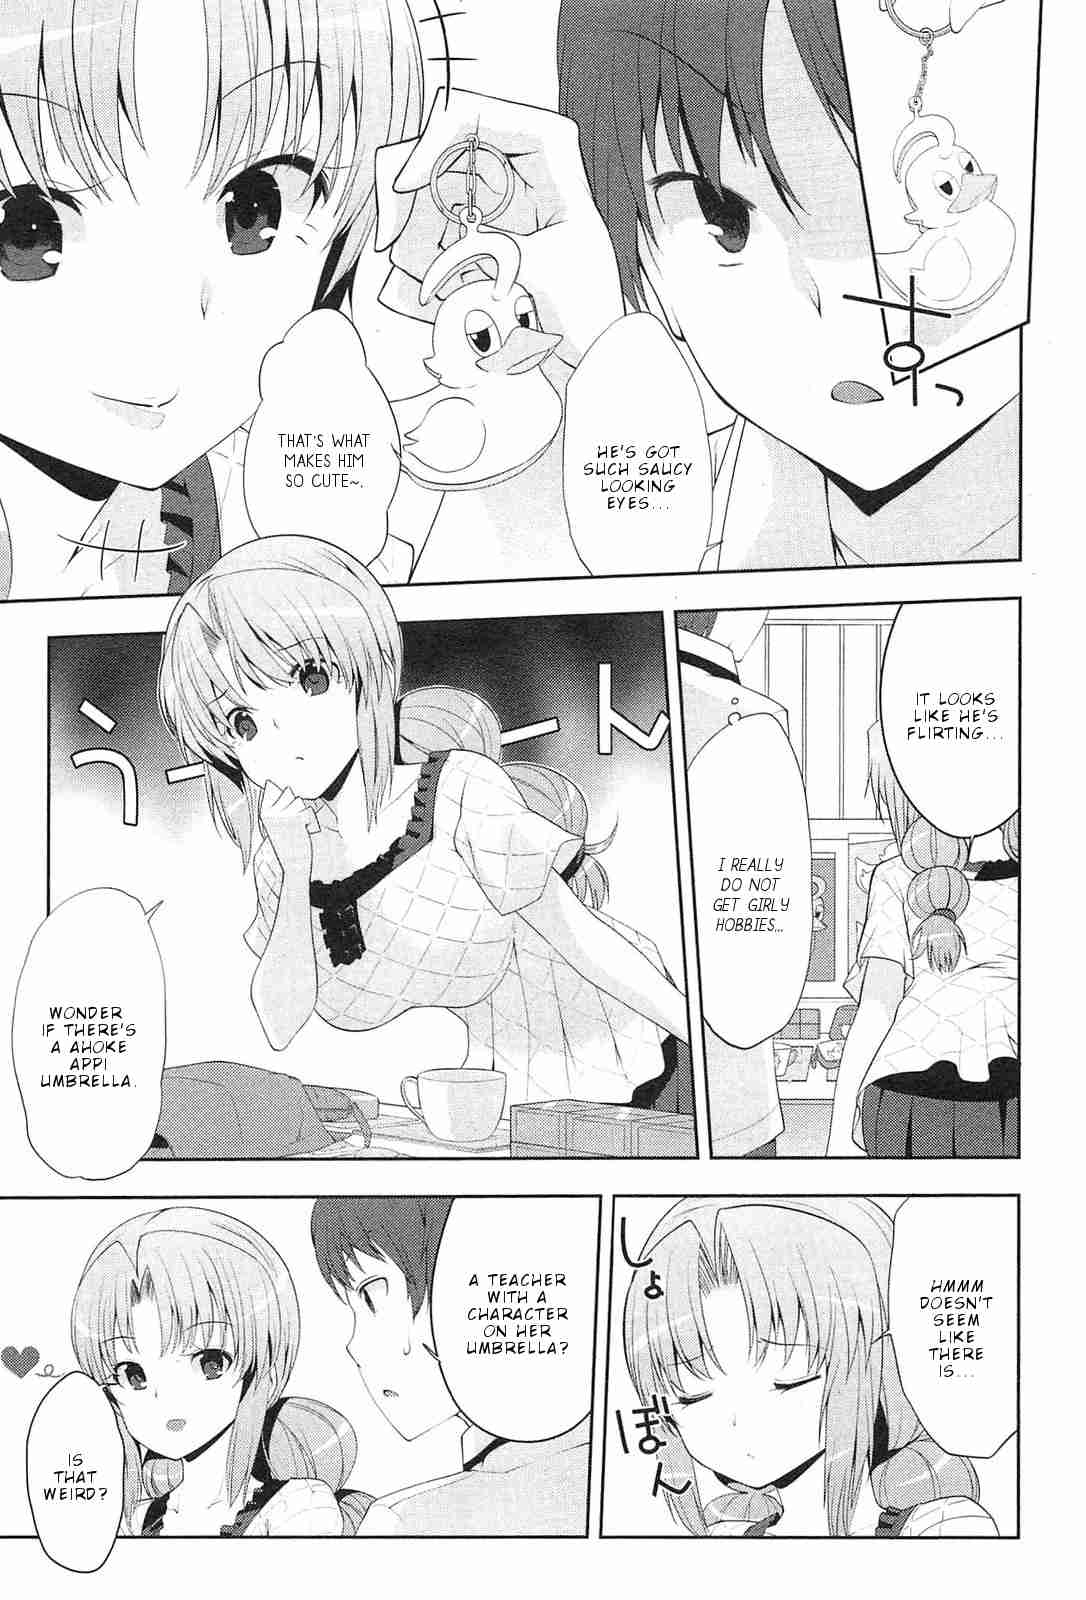 Photo Kano Memorial Pictures Vol. 1 Ch. 6 First School Date!